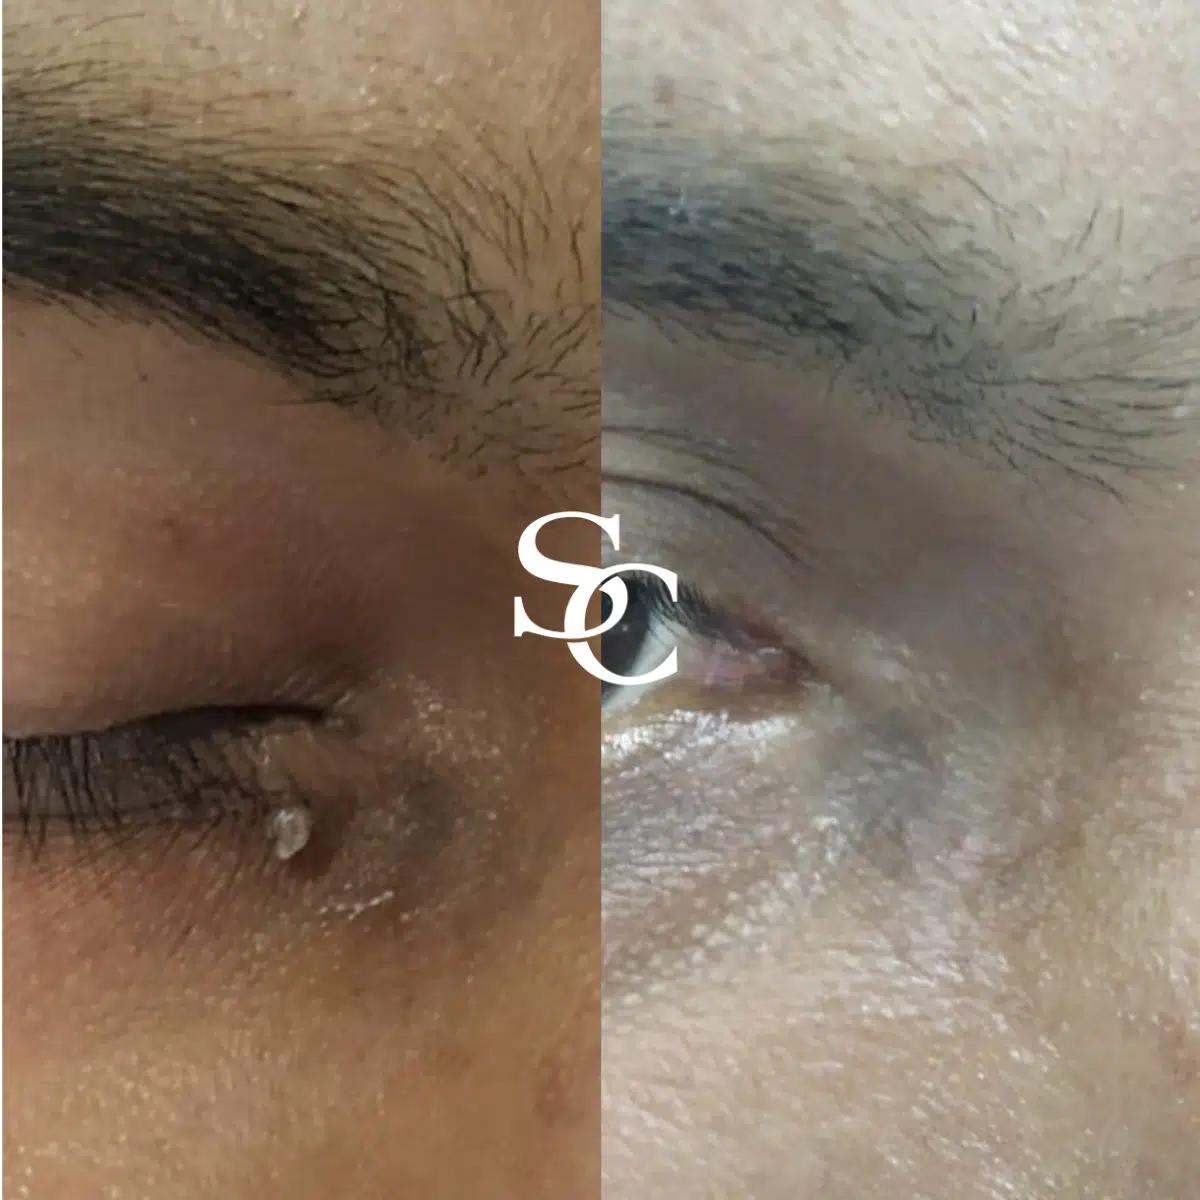 Mole Removal Client Results